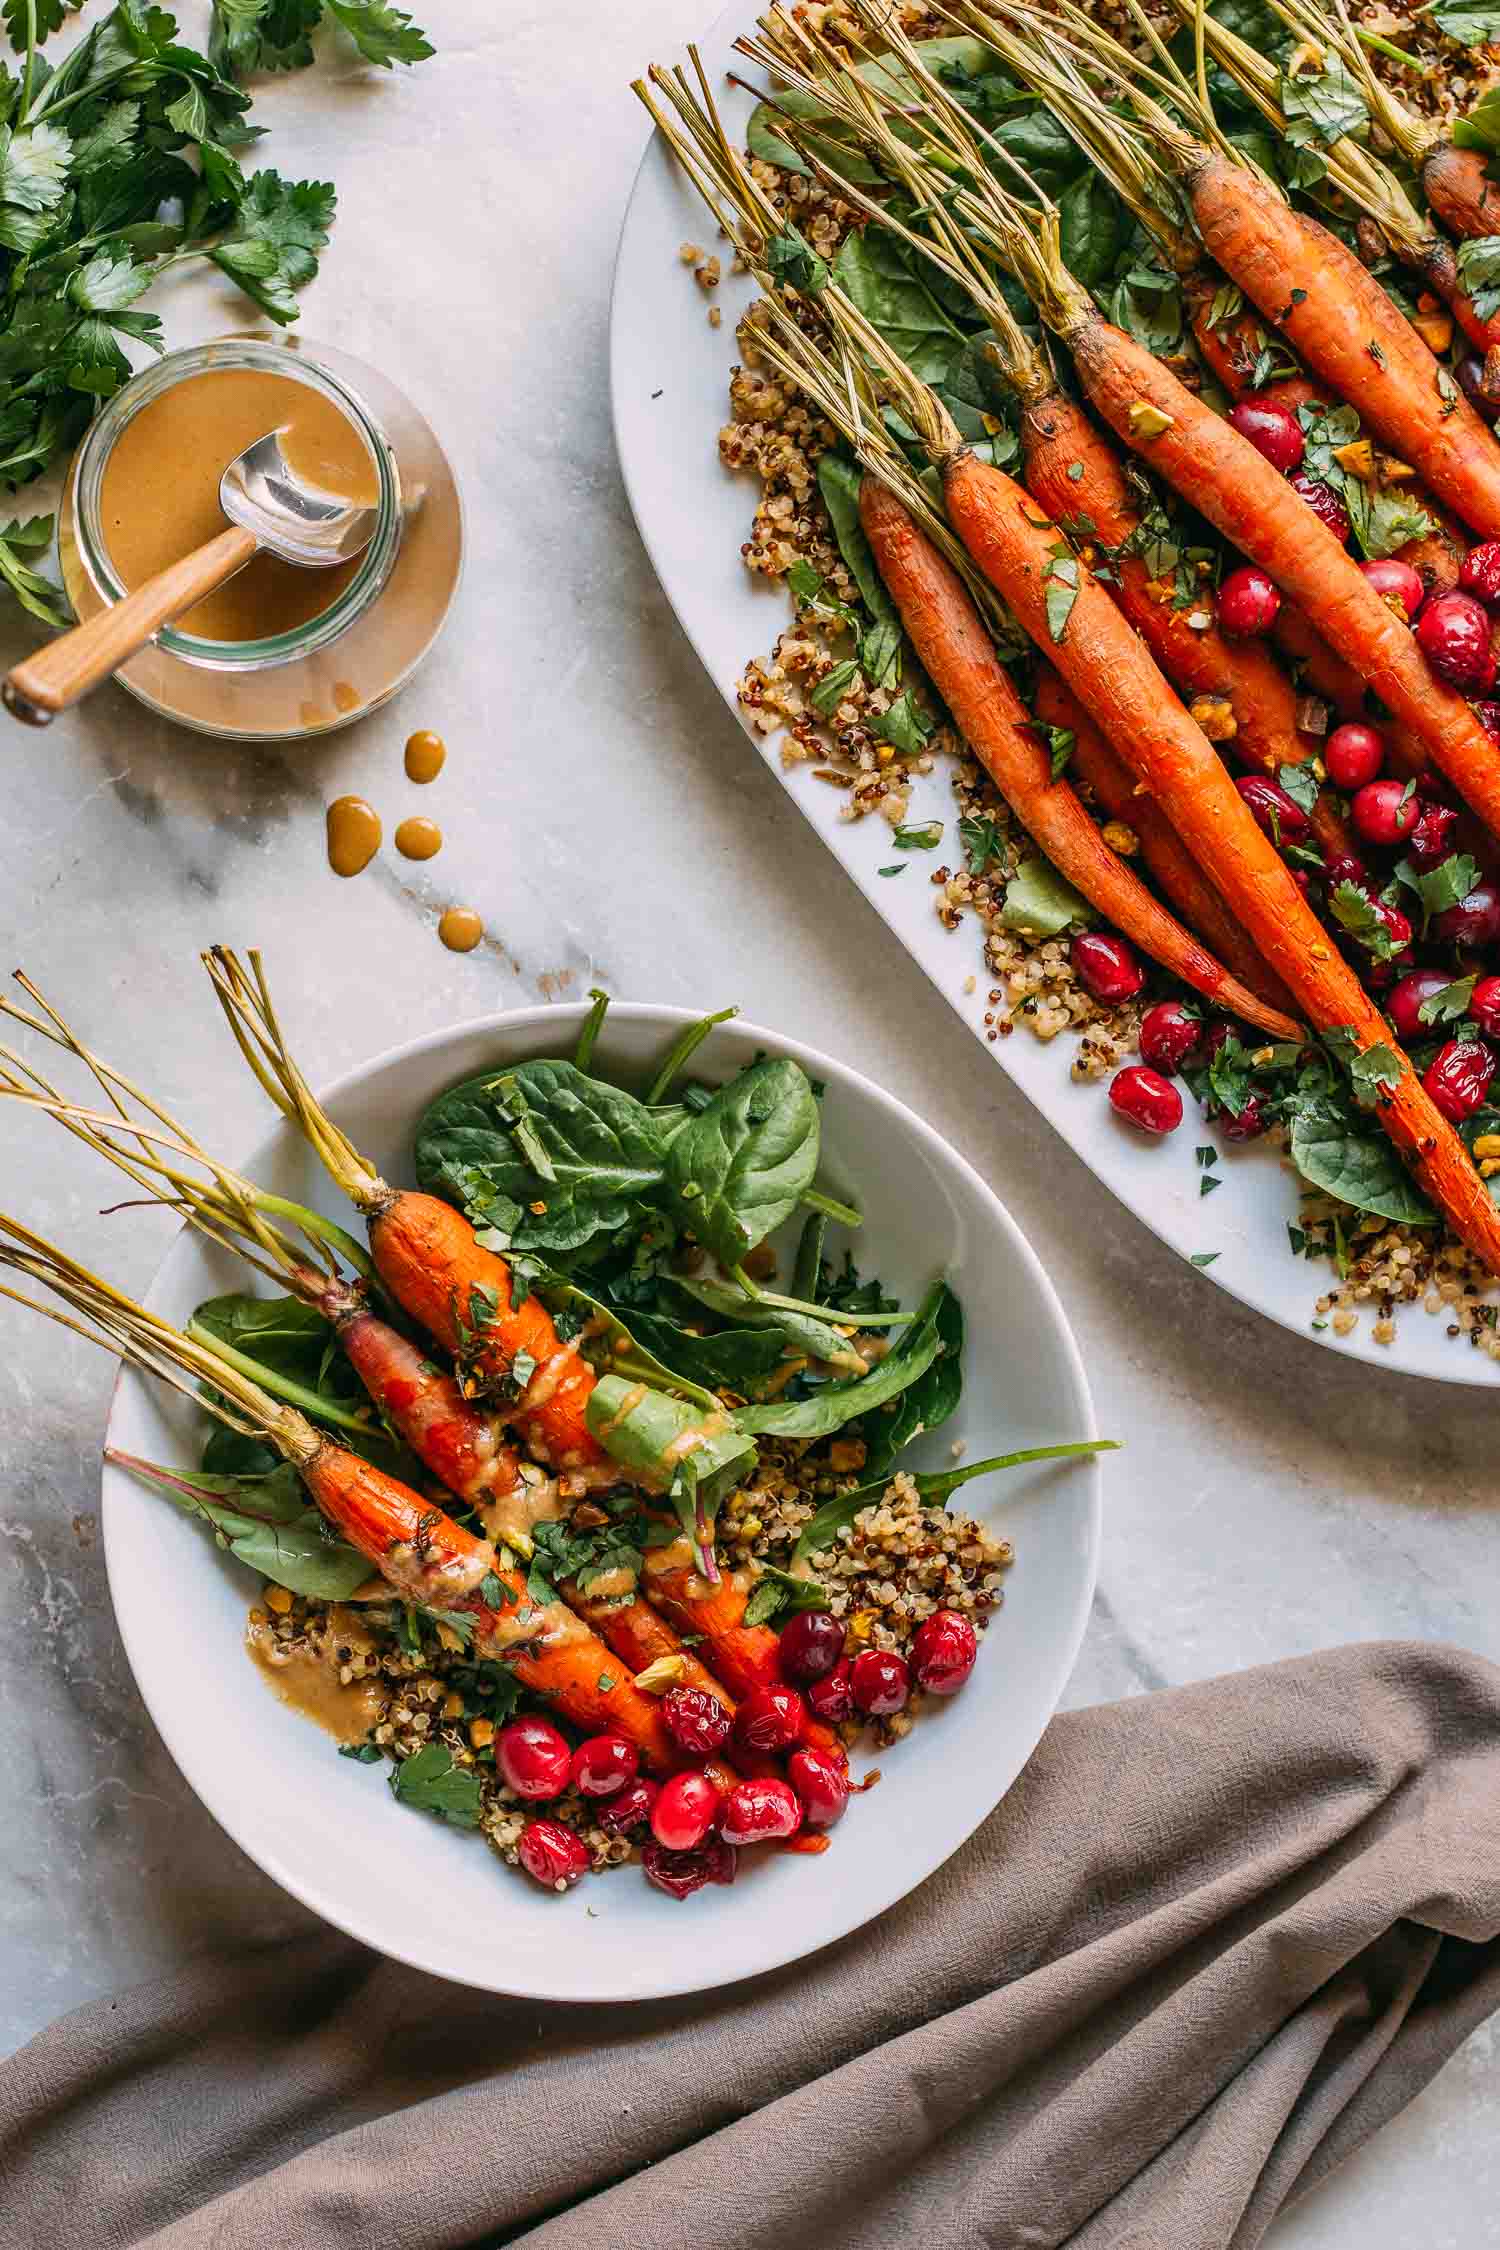 20 Root-to-Stem Plant-Based Recipes